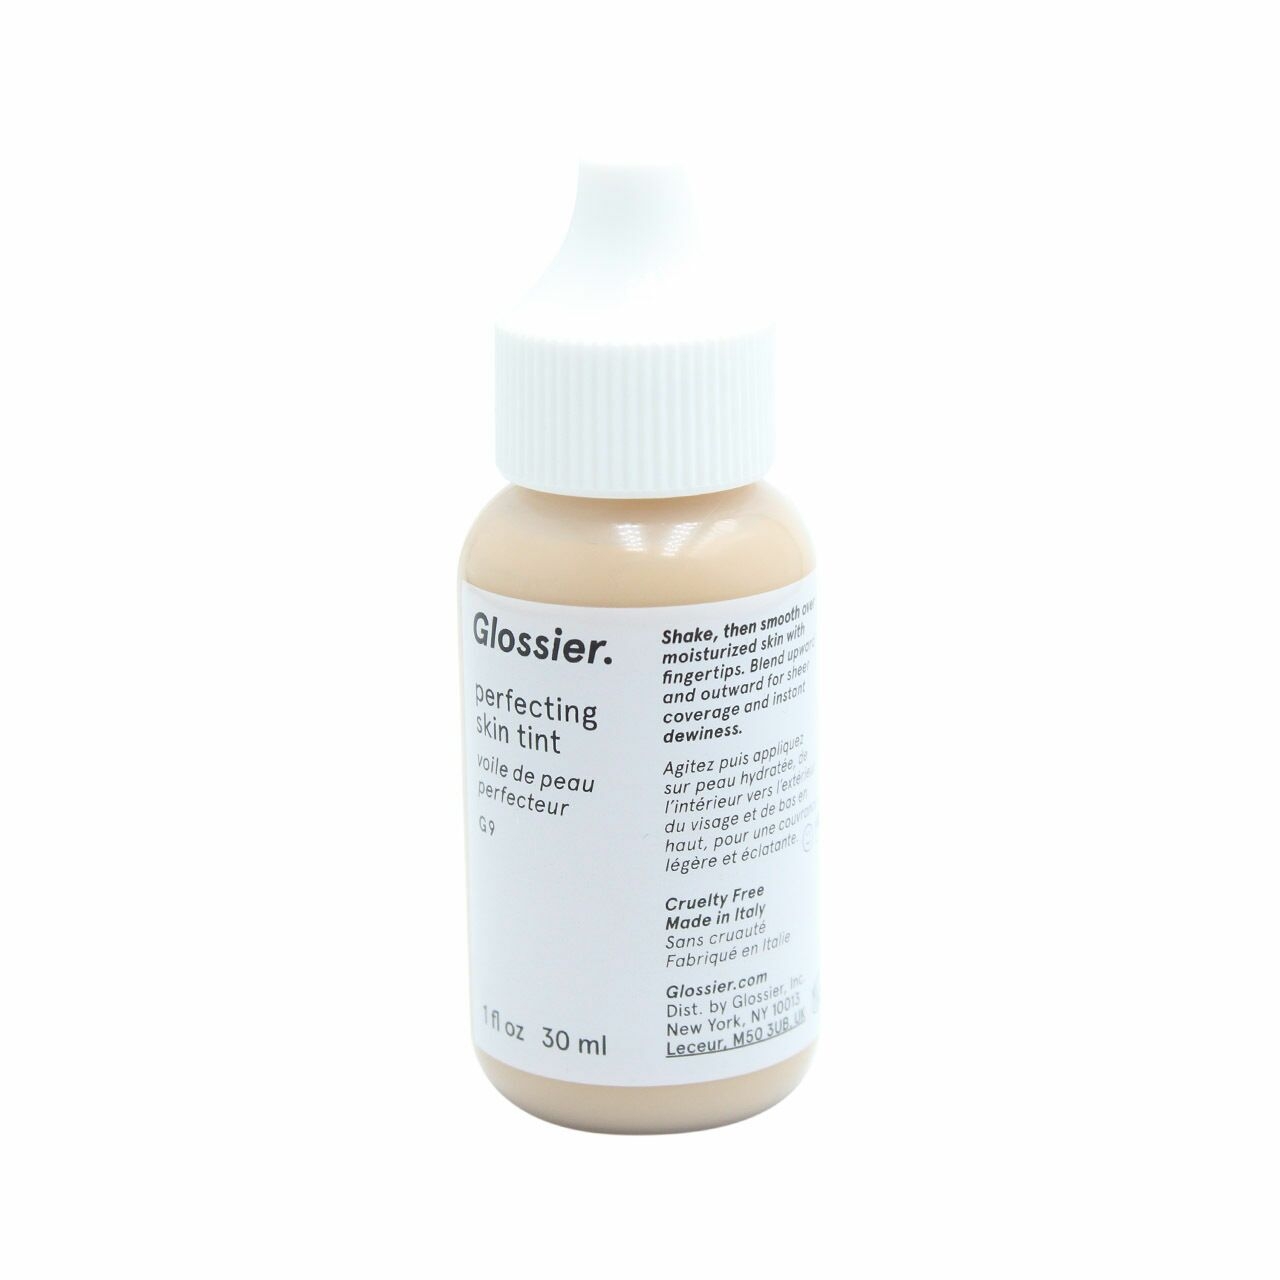 Glossier Perfect Skin Tint Faces